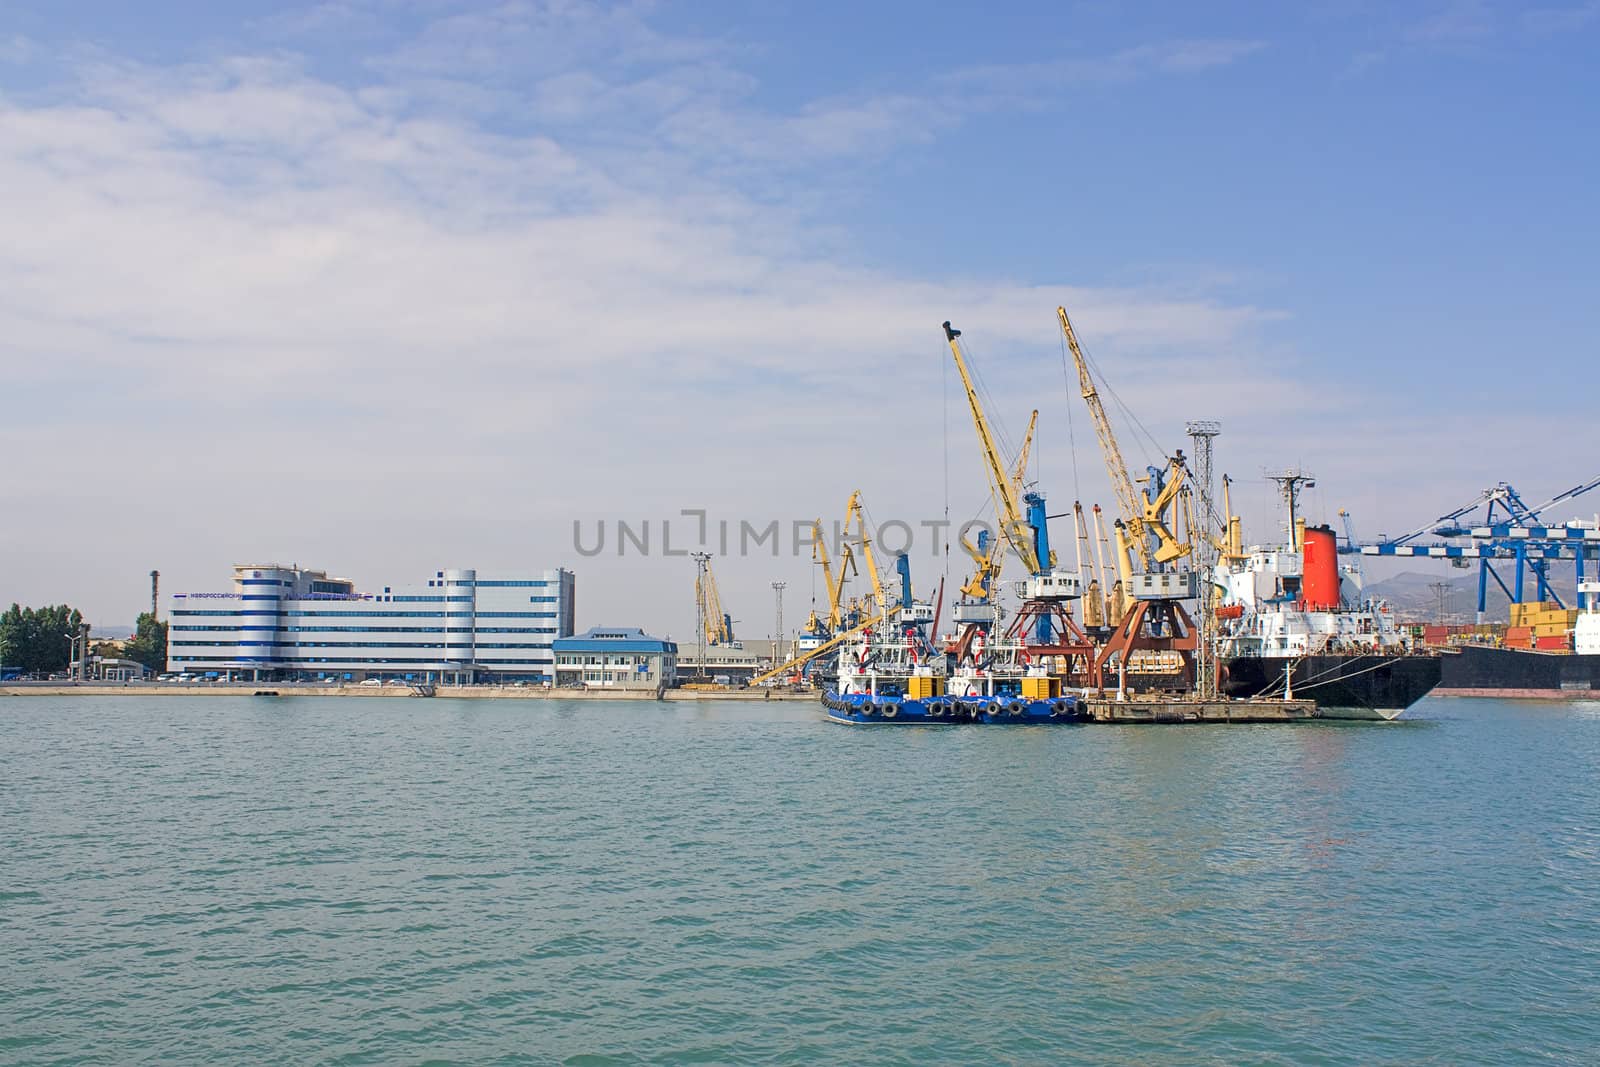 Tower cranes to load cargo ships in port of Novorossiysk, Russia